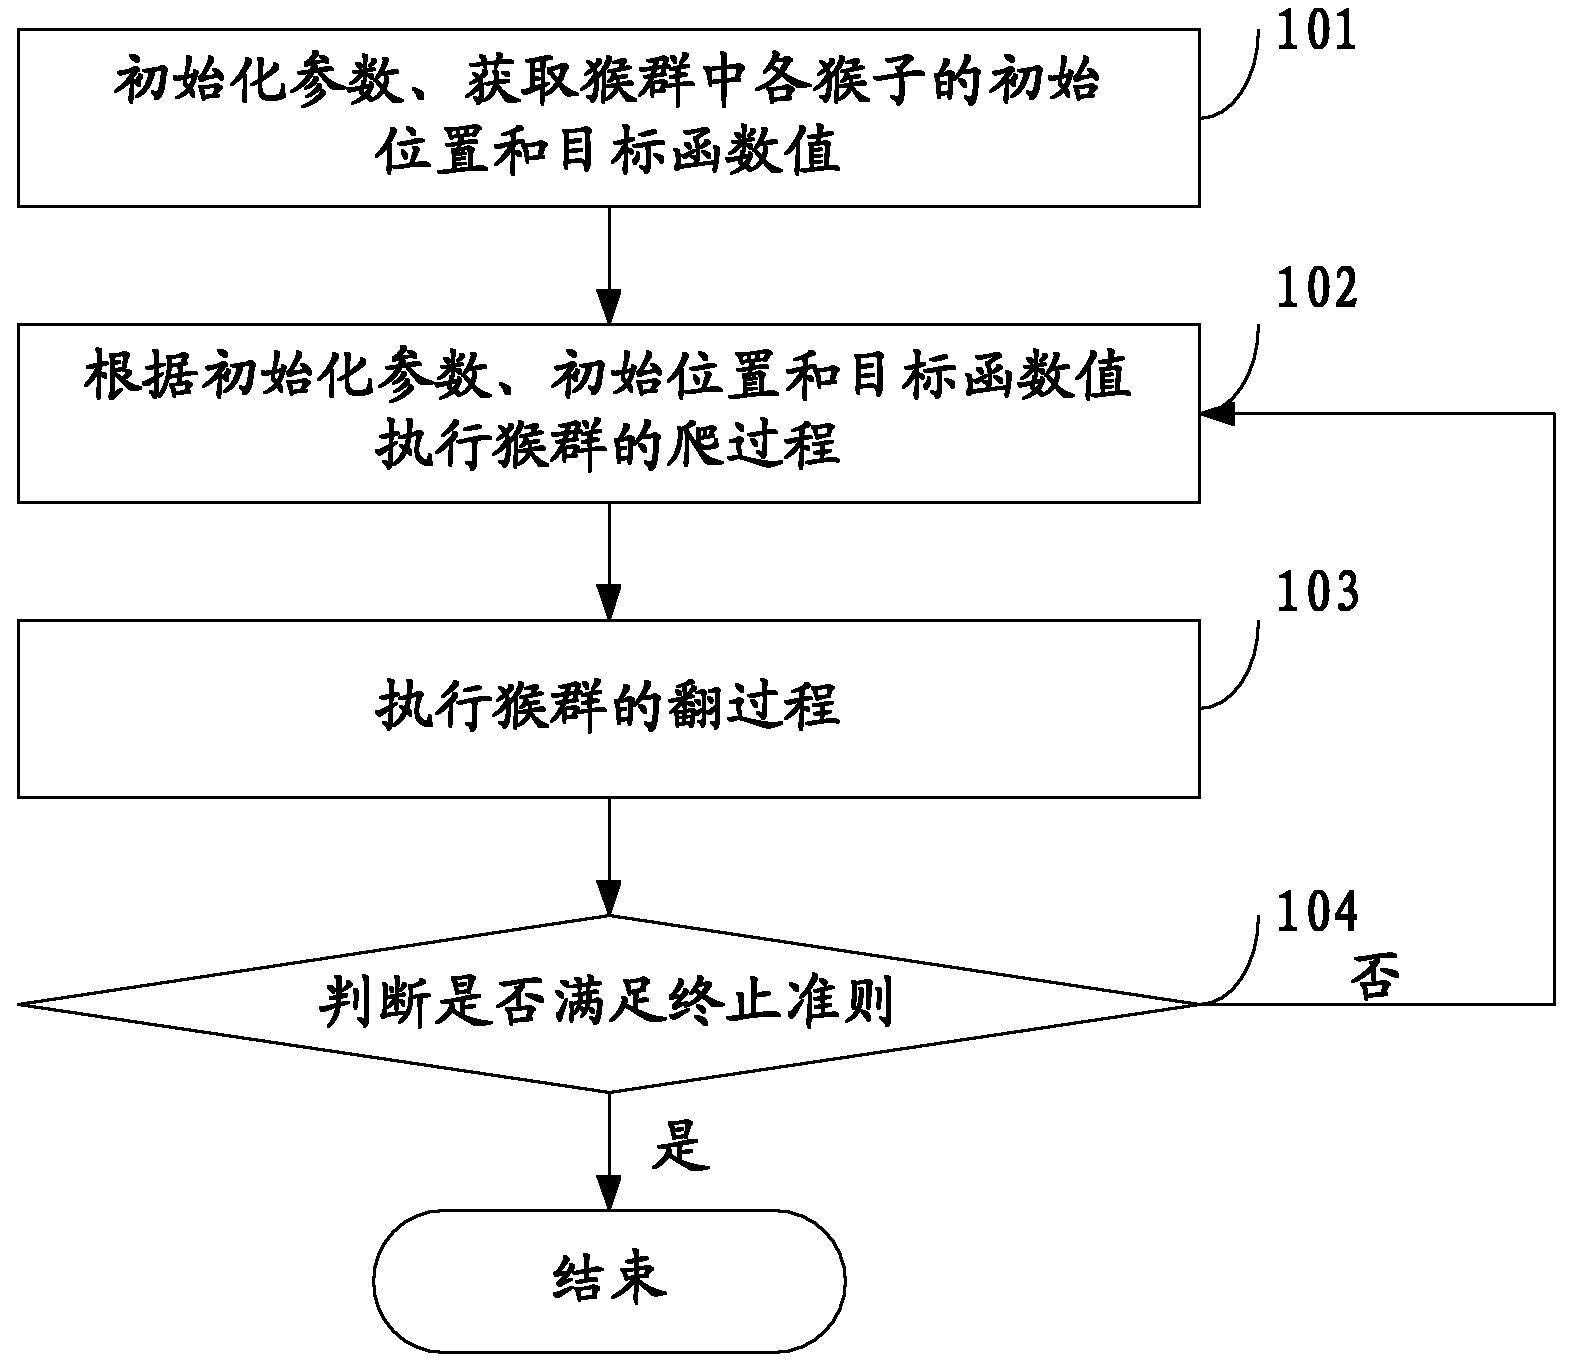 Method for expansion planning of power transmission network